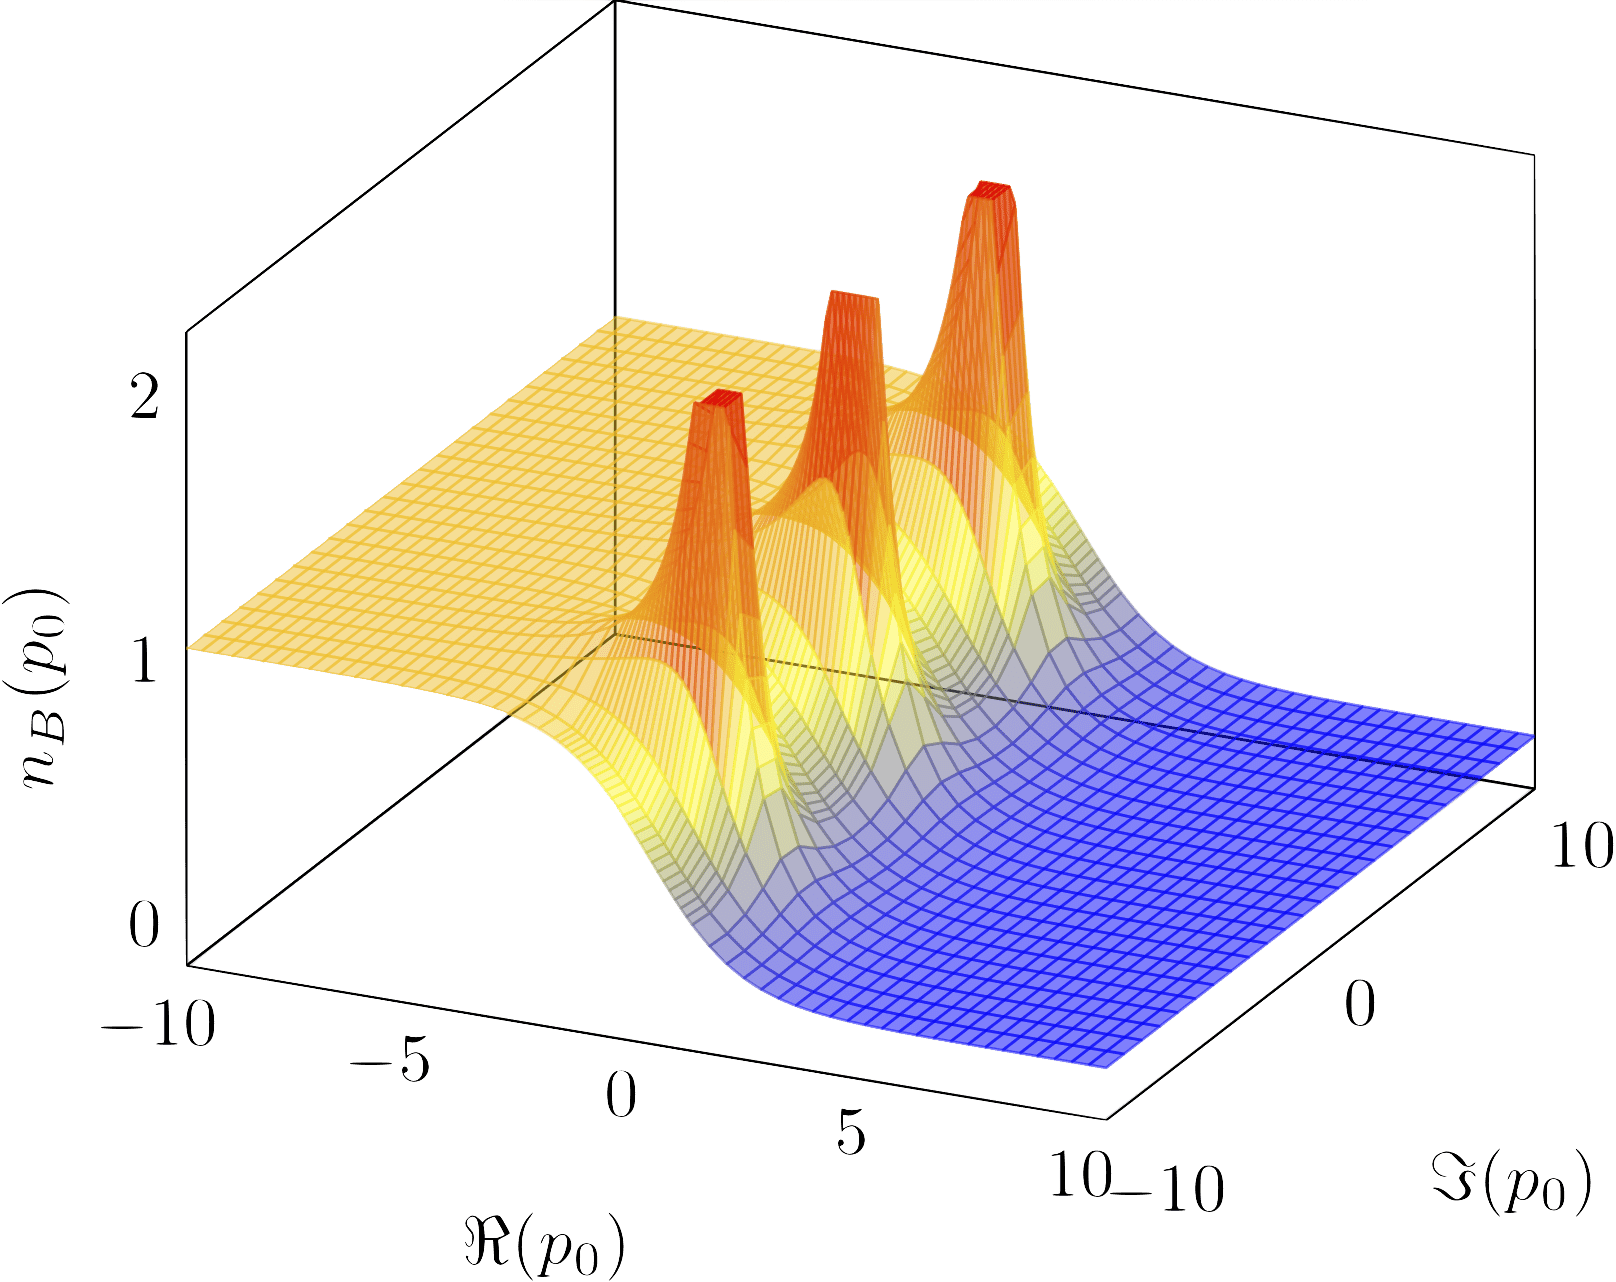 Absolute value of Bose-Einstein distribution over complex plane